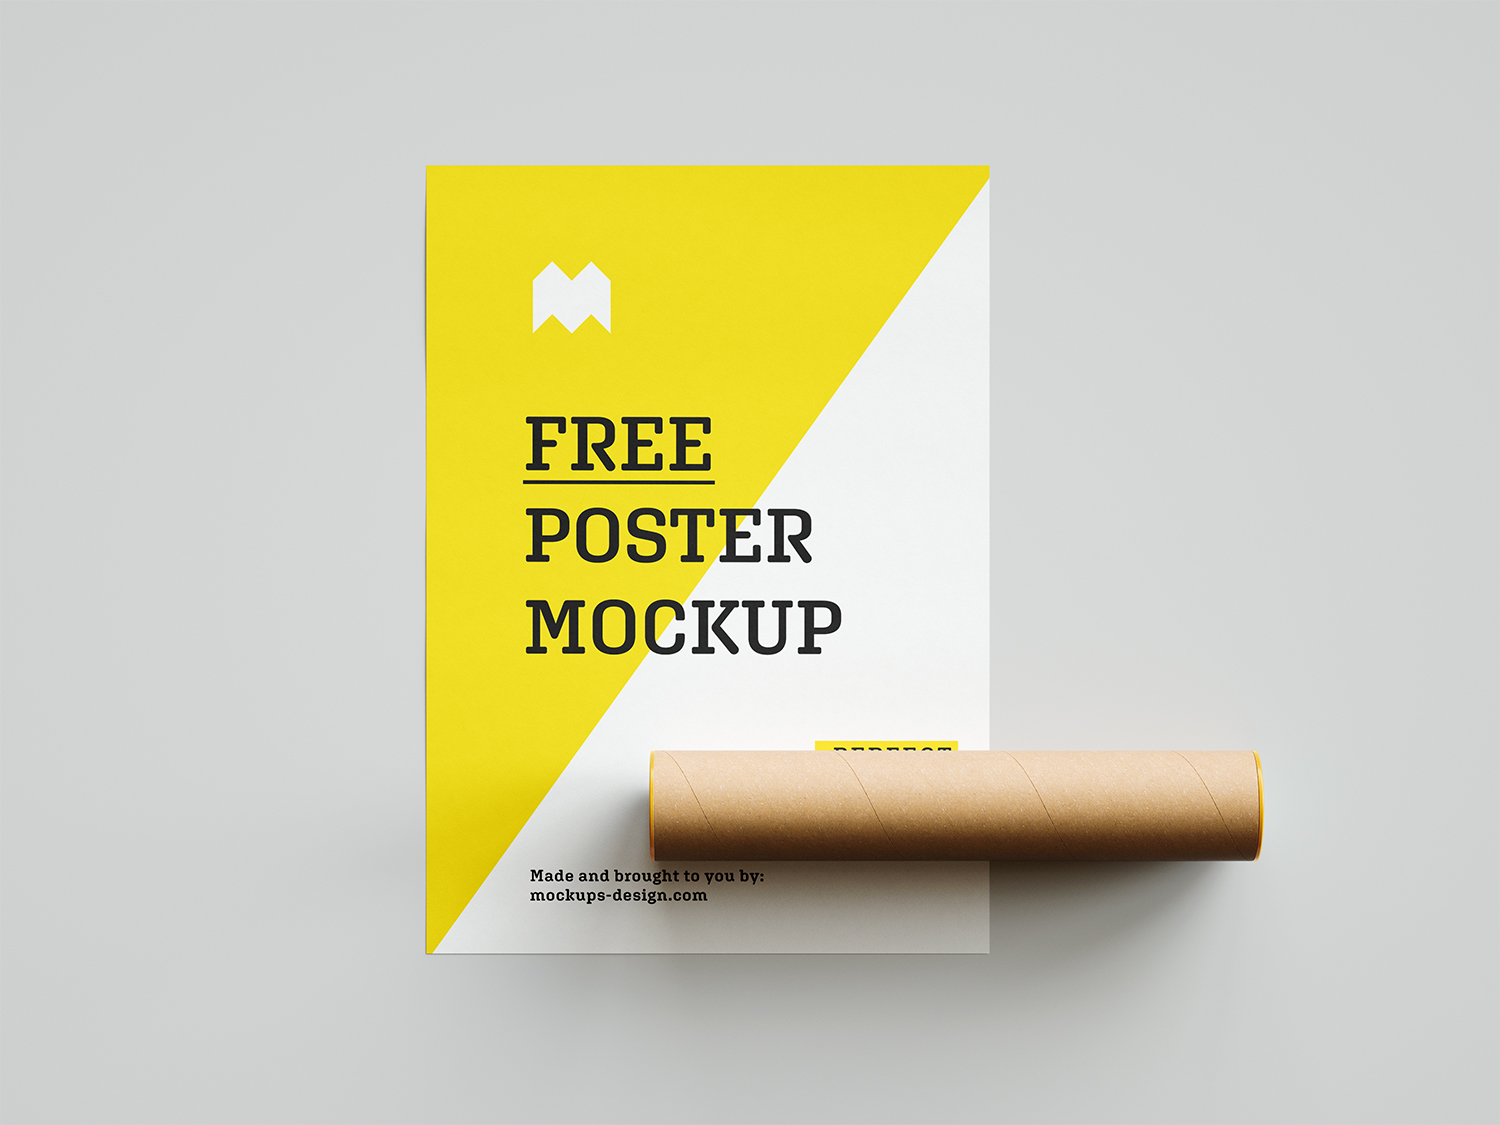 Poster Free Mockup with a Paper Tube